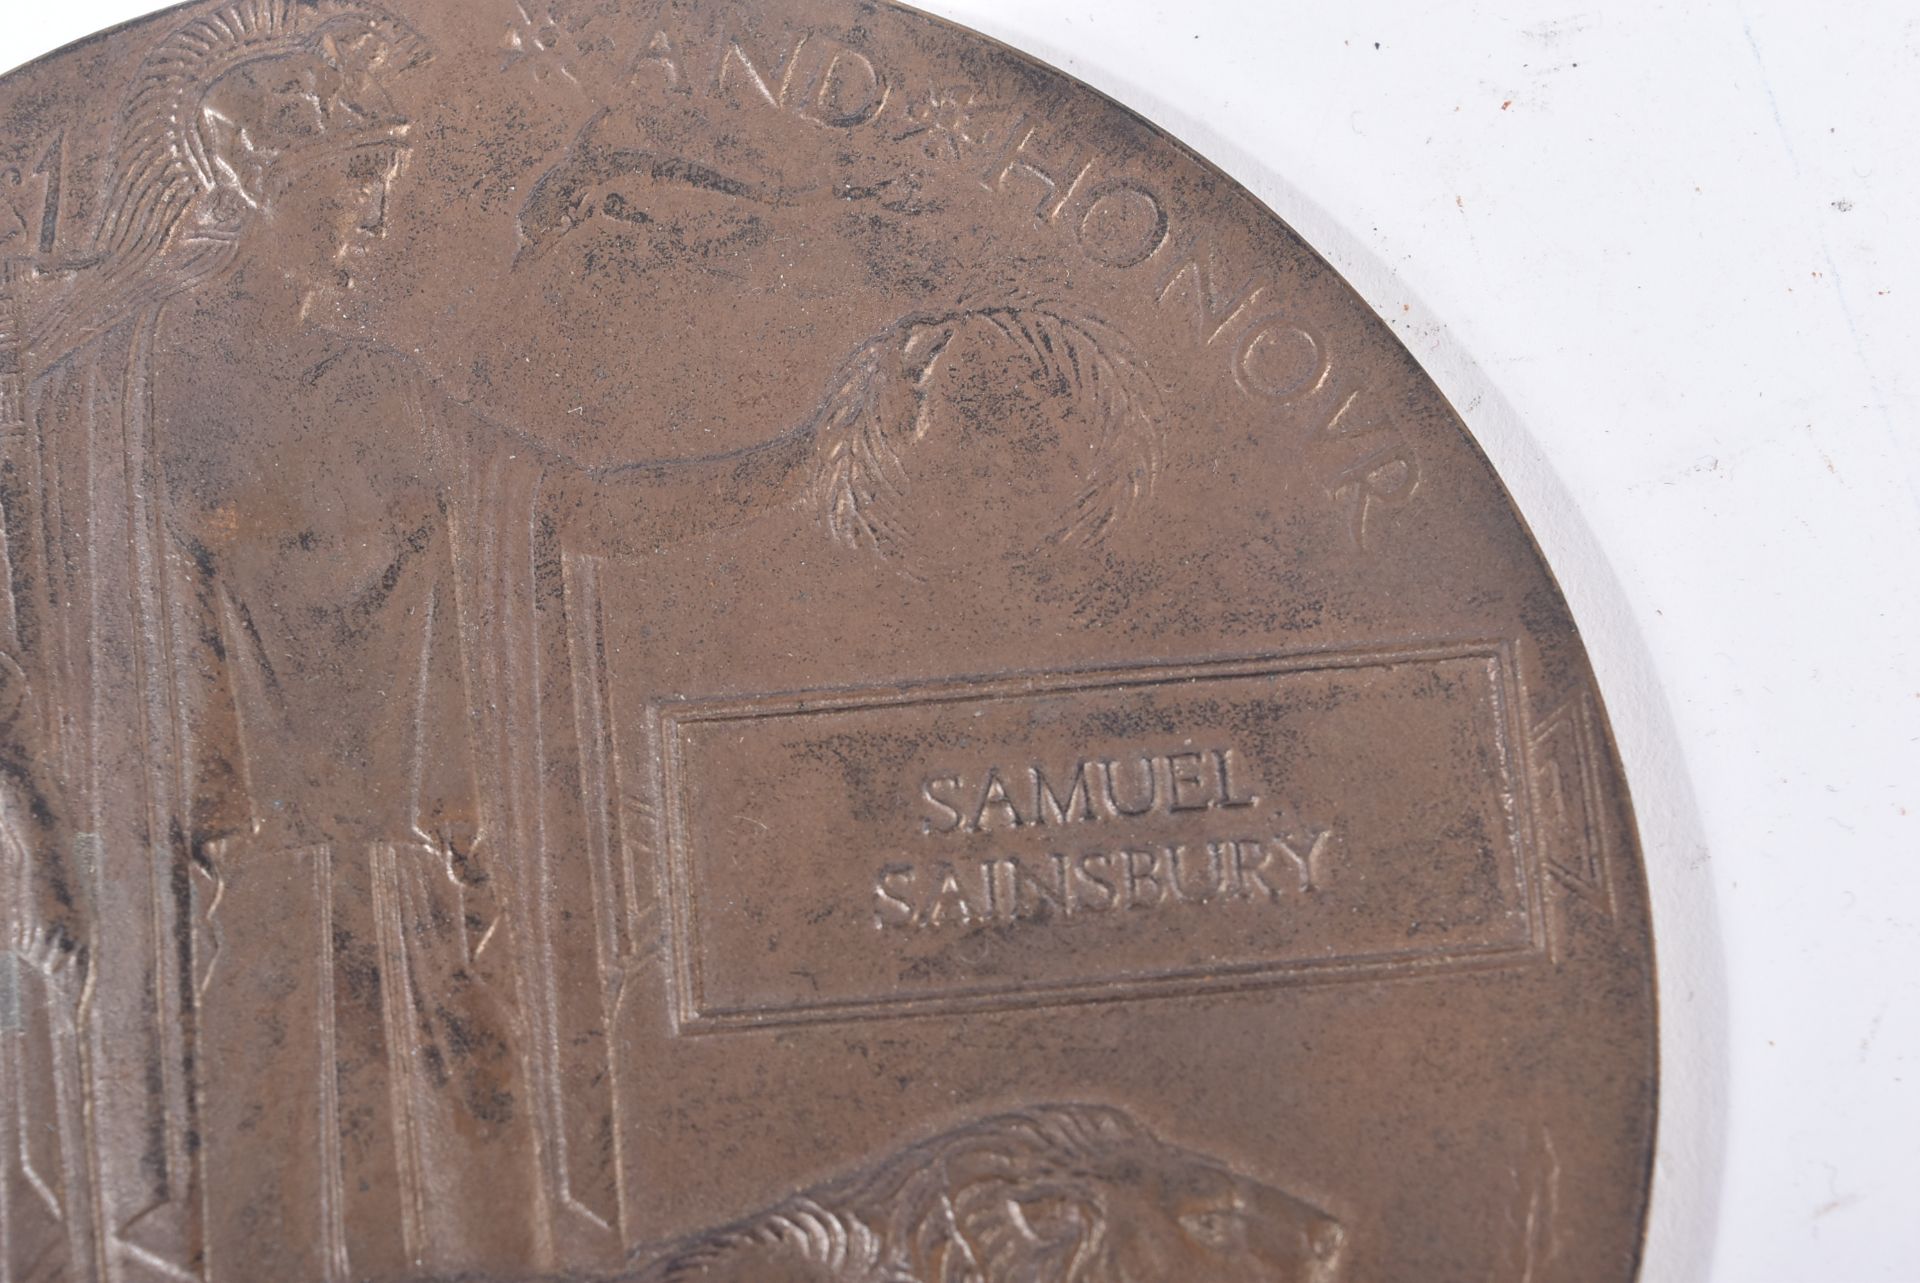 WWI FIRST WORLD WAR - DEATH PLAQUE FOR ONE SAMUEL SAINSBURY - Image 3 of 4